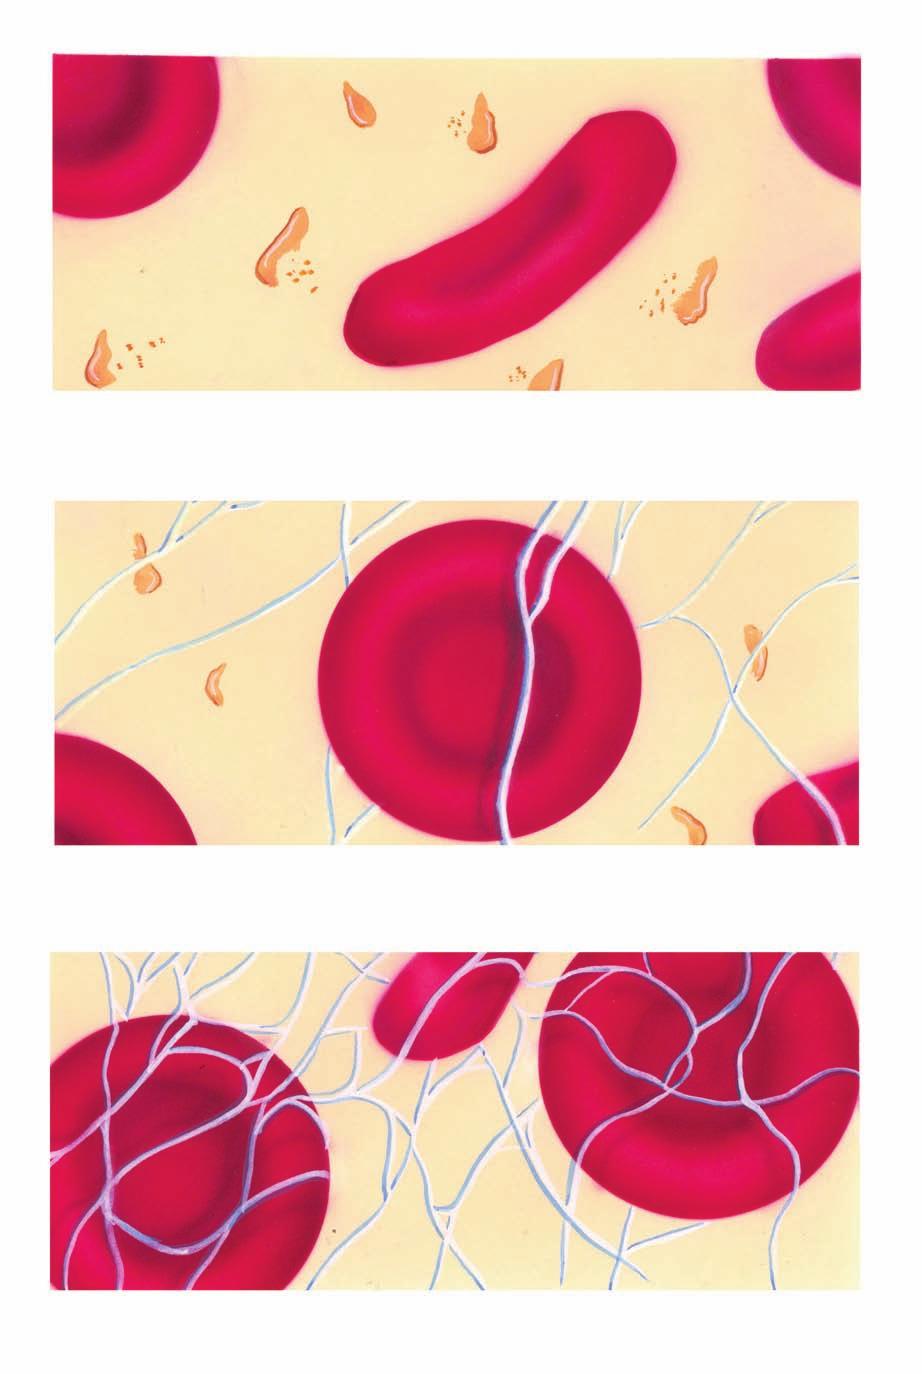 Blood Clotting Platelets rupture, releasing a chemical into the blood.